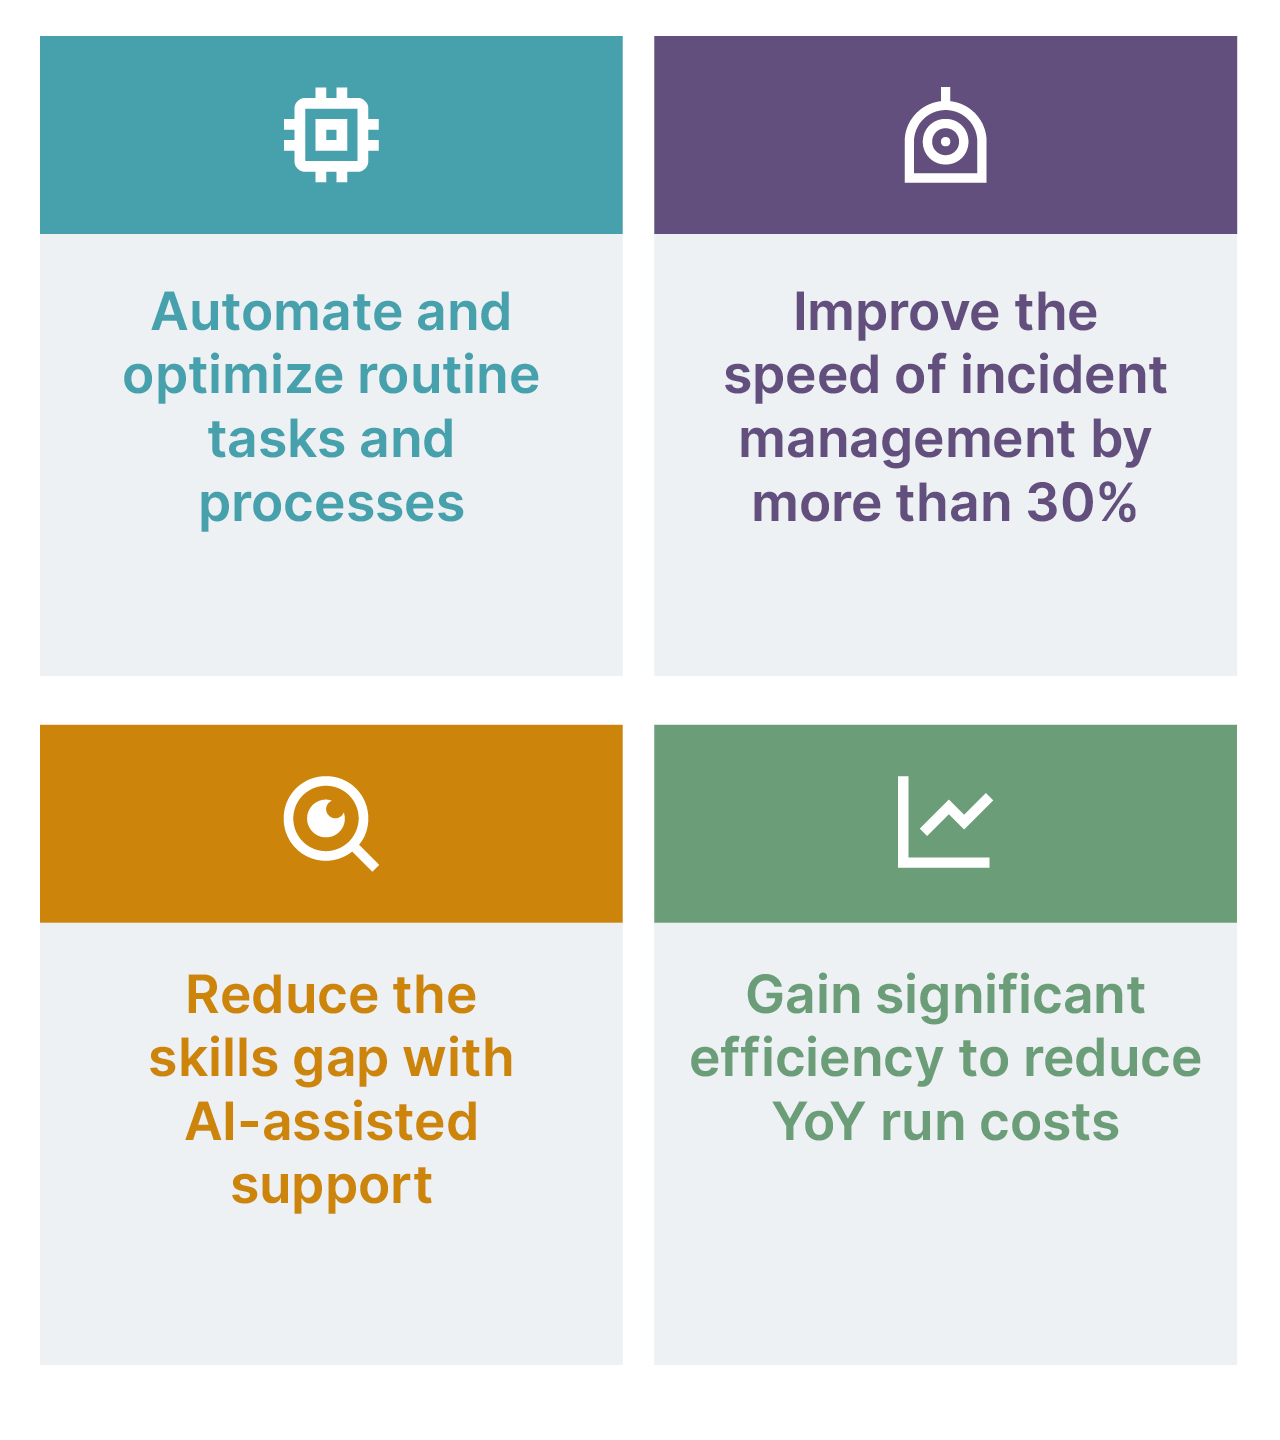 A table highlights the benefits of AI-powered managed services, including automating and optimizing routine tasks, improving incident management by 30%, reducing the skills gap with AI-assisted support and gaining significant efficiency to reduce YOY run costs 